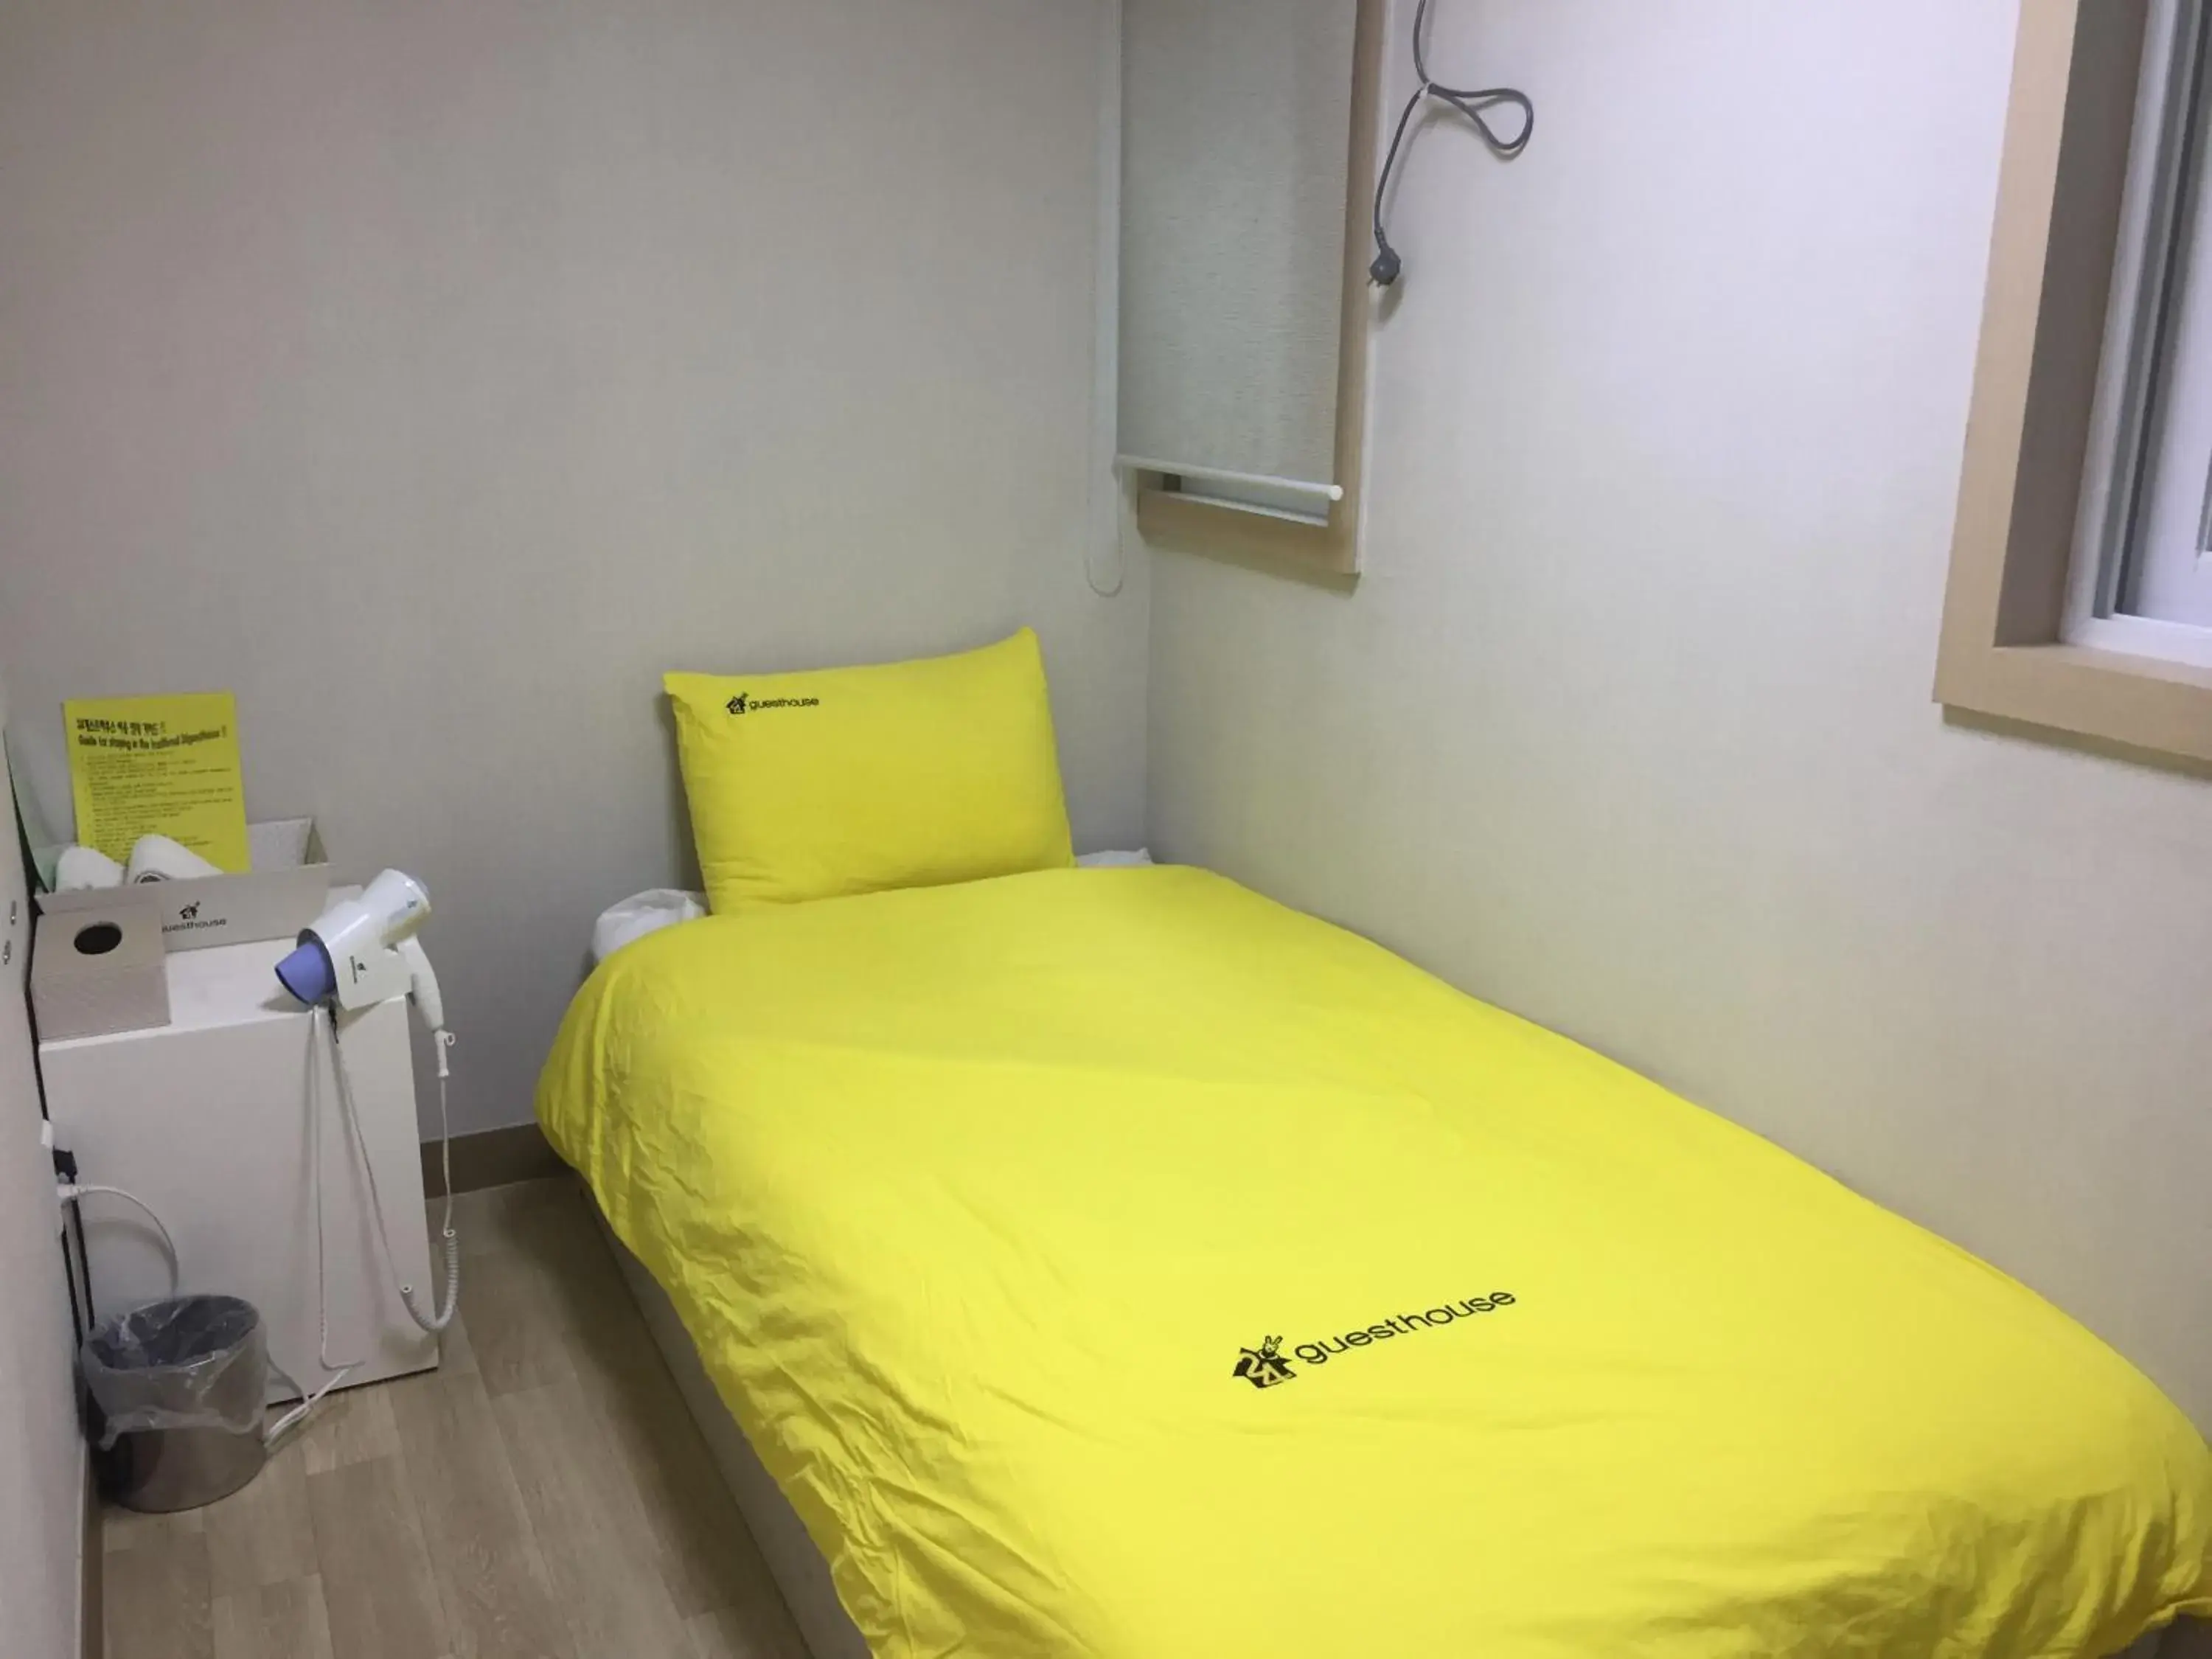 Bed in 24 Guesthouse KyungHee University